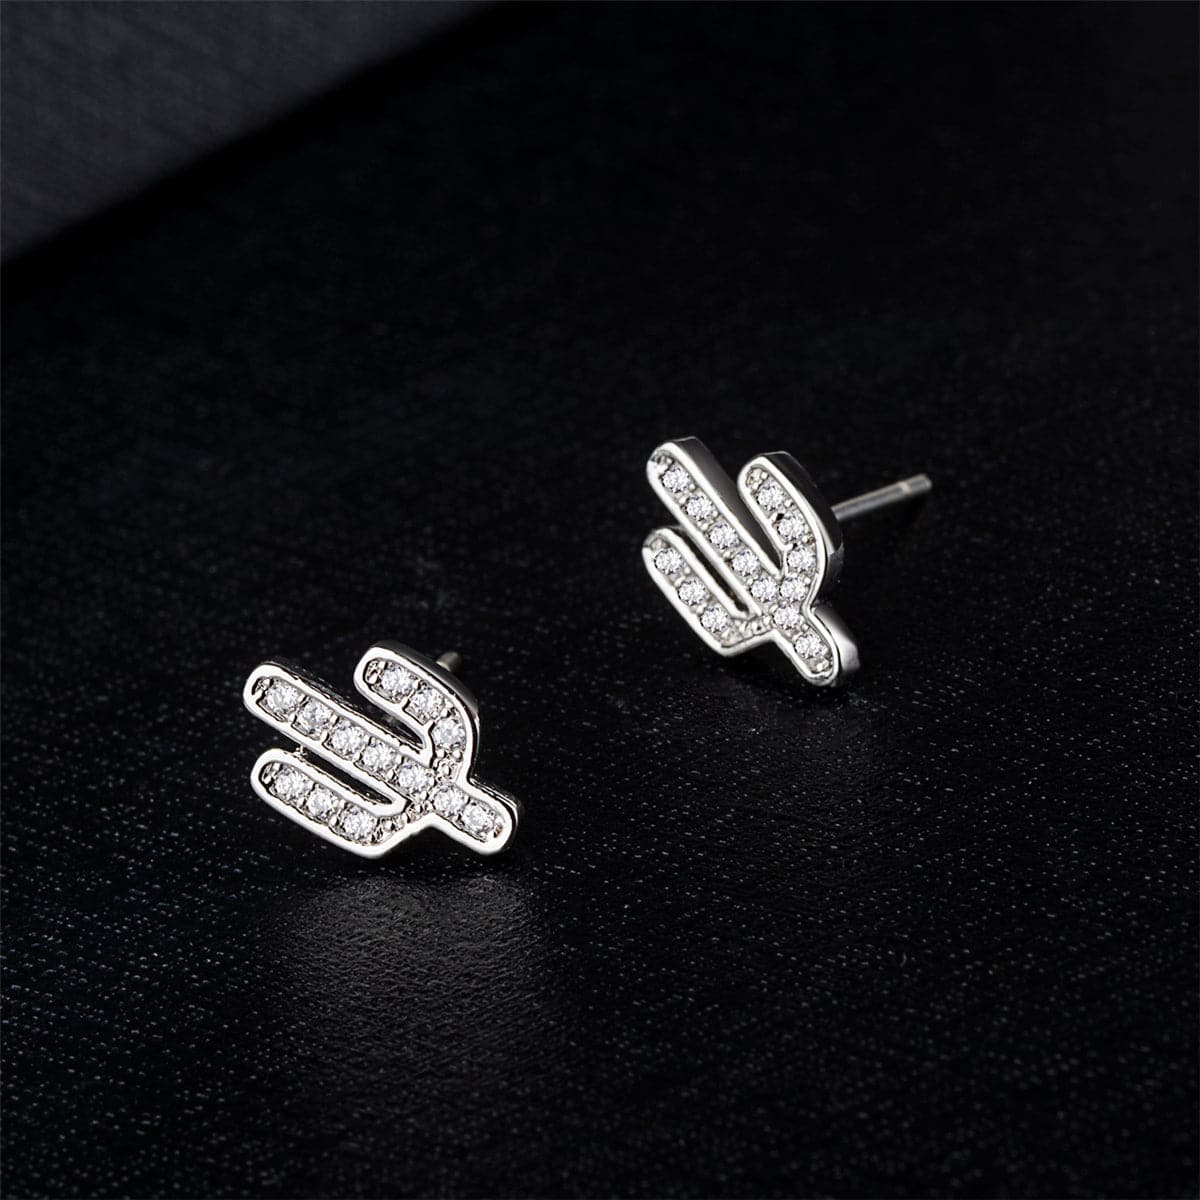 Cubic Zirconia & Silver-Plated Cactus Stud Earrings